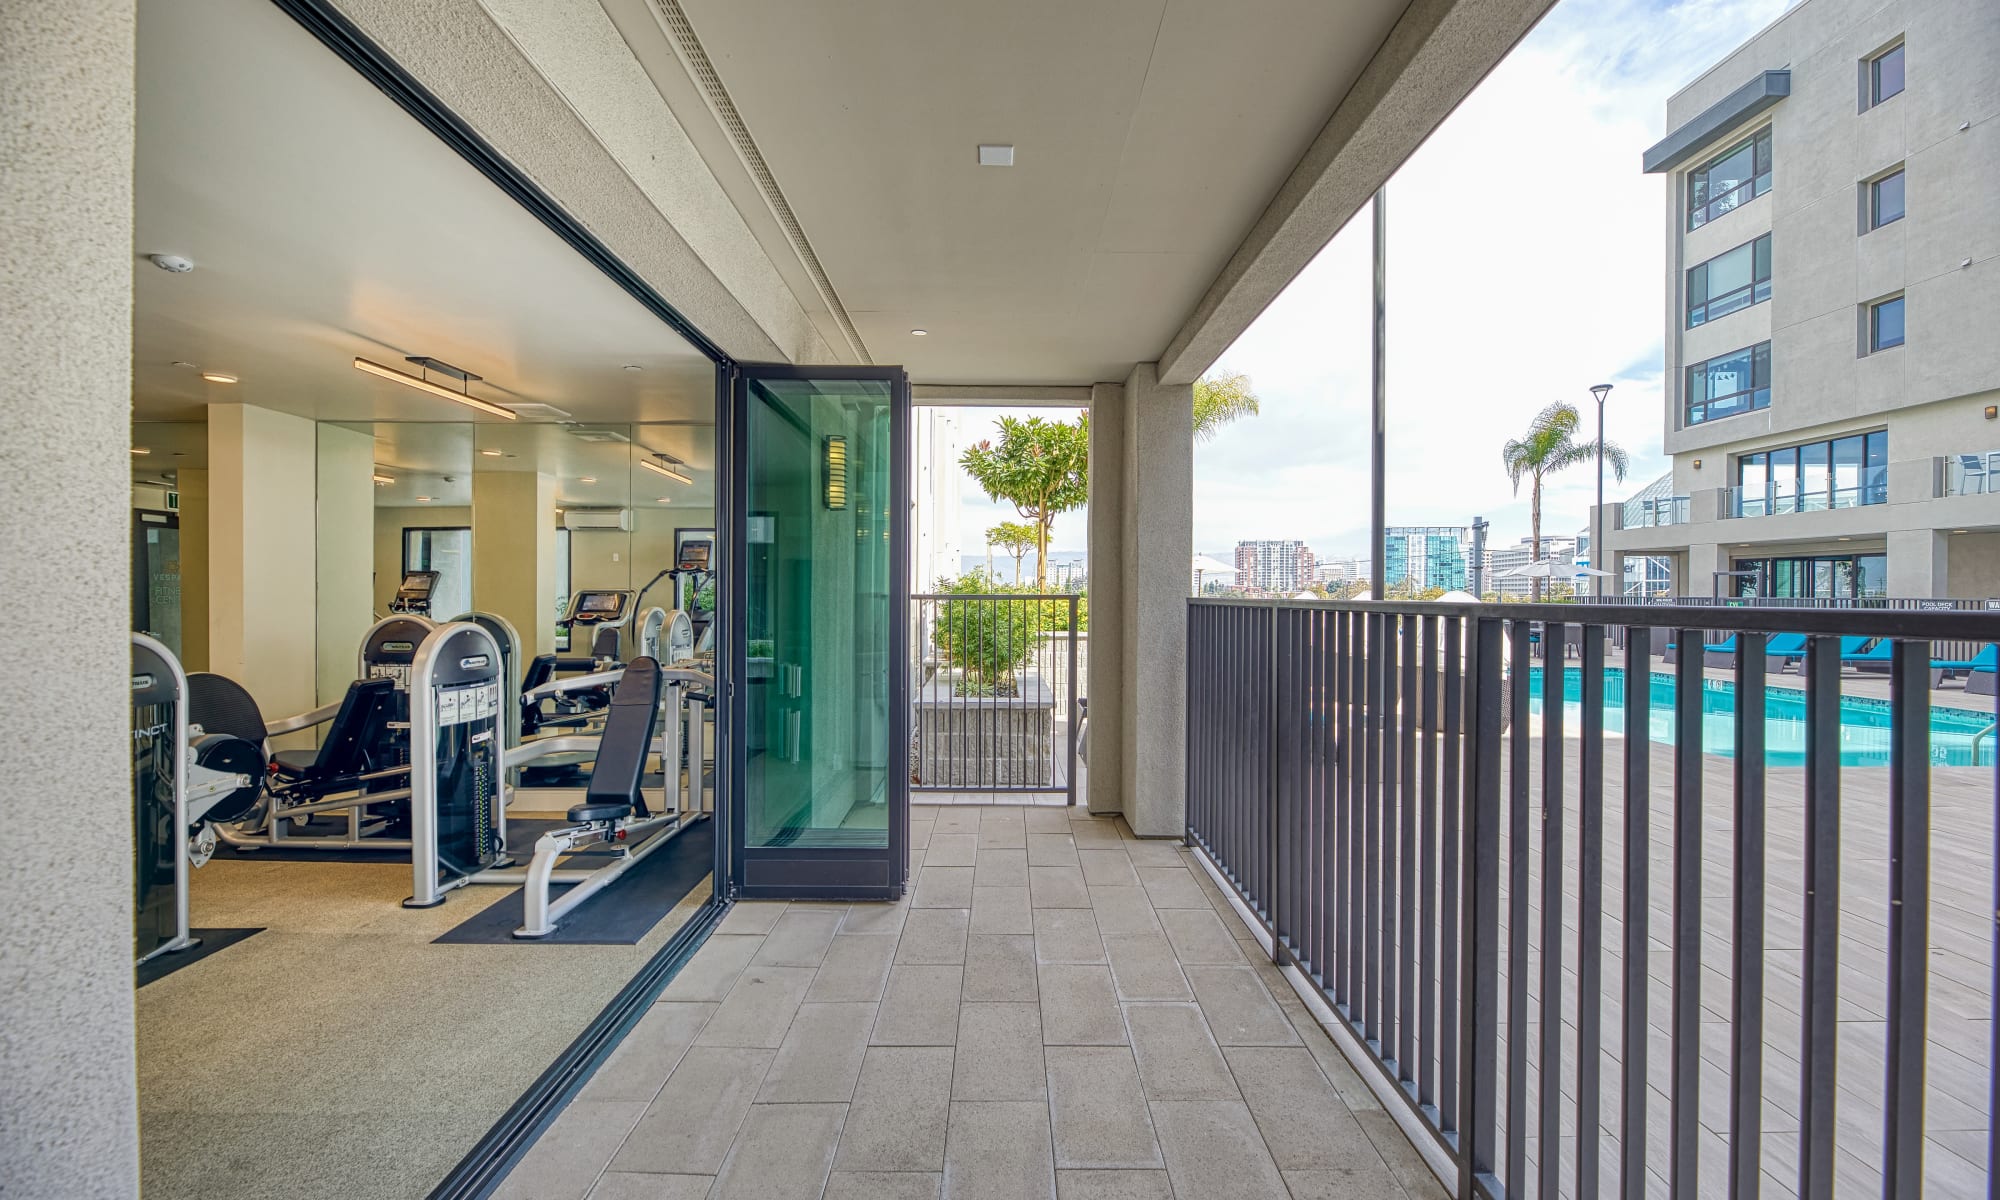 Vespaio in San Jose, California features a fitness center with large sliding doors that open on to outdoor patio space